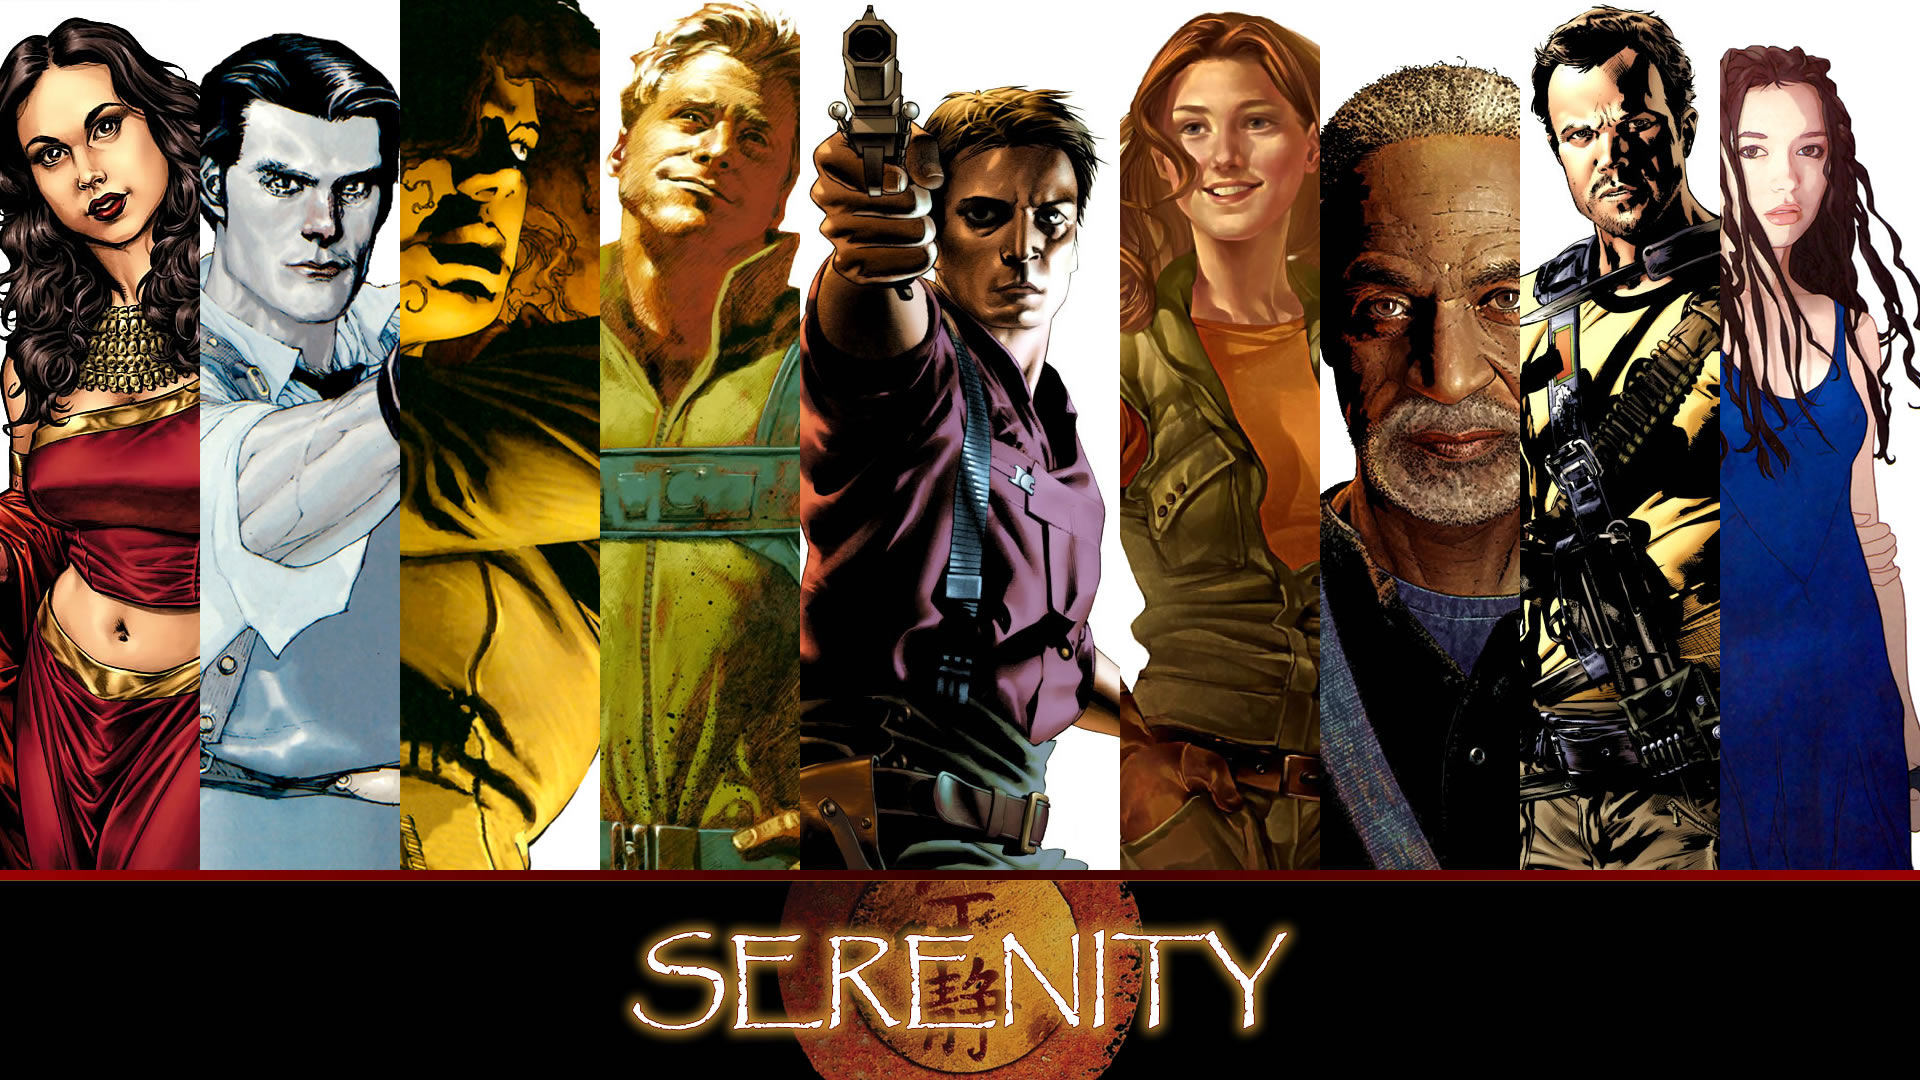 serenity, Firefly, Sci fi, Poster Wallpaper HD / Desktop and Mobile Background